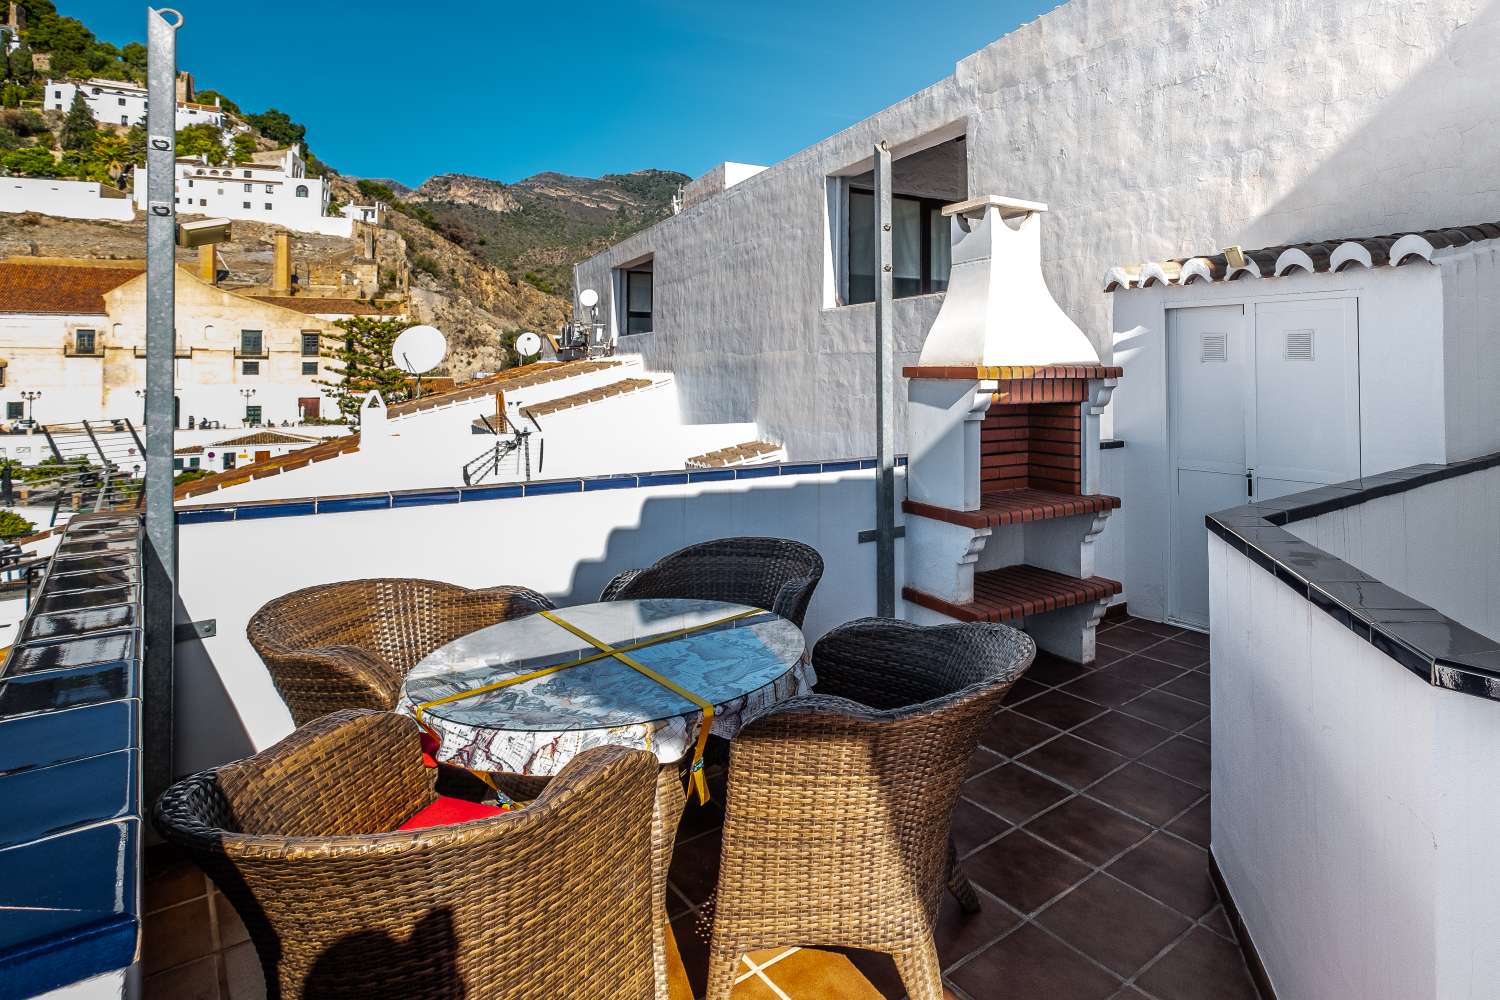 Beautiful apartment with spectacular views over Frigiliana and the mountains